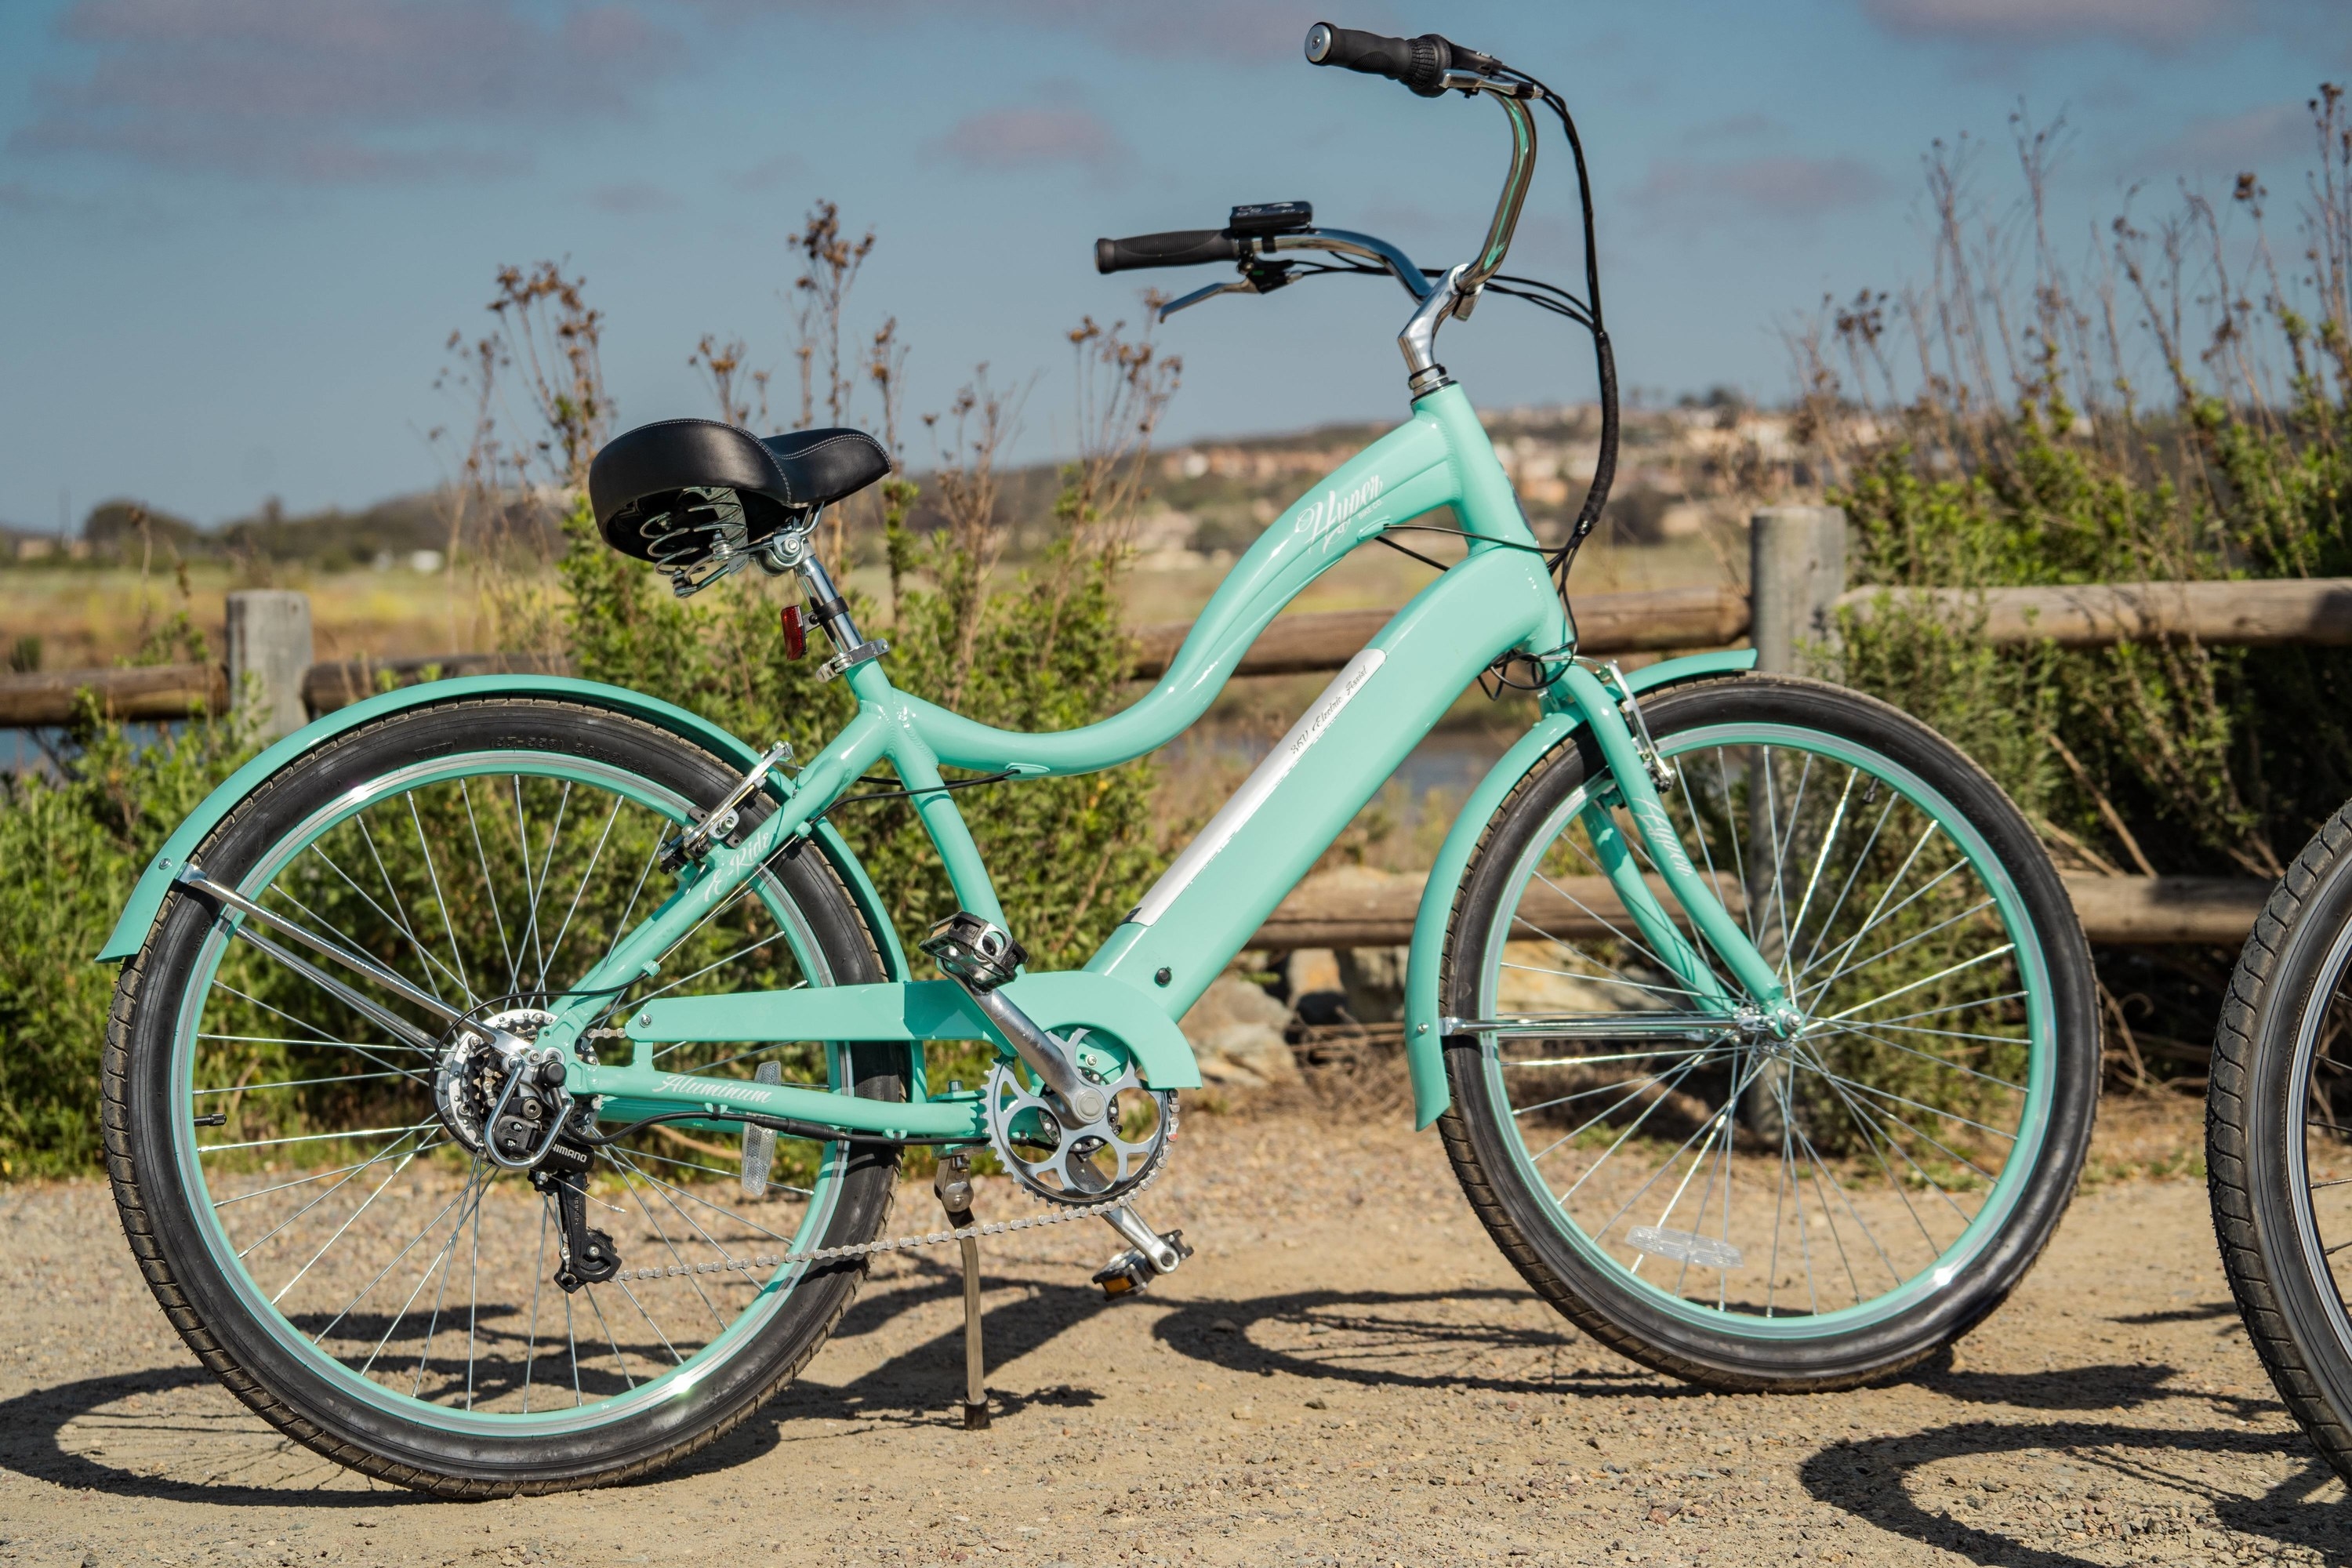 the turquoise bike on a dirt road